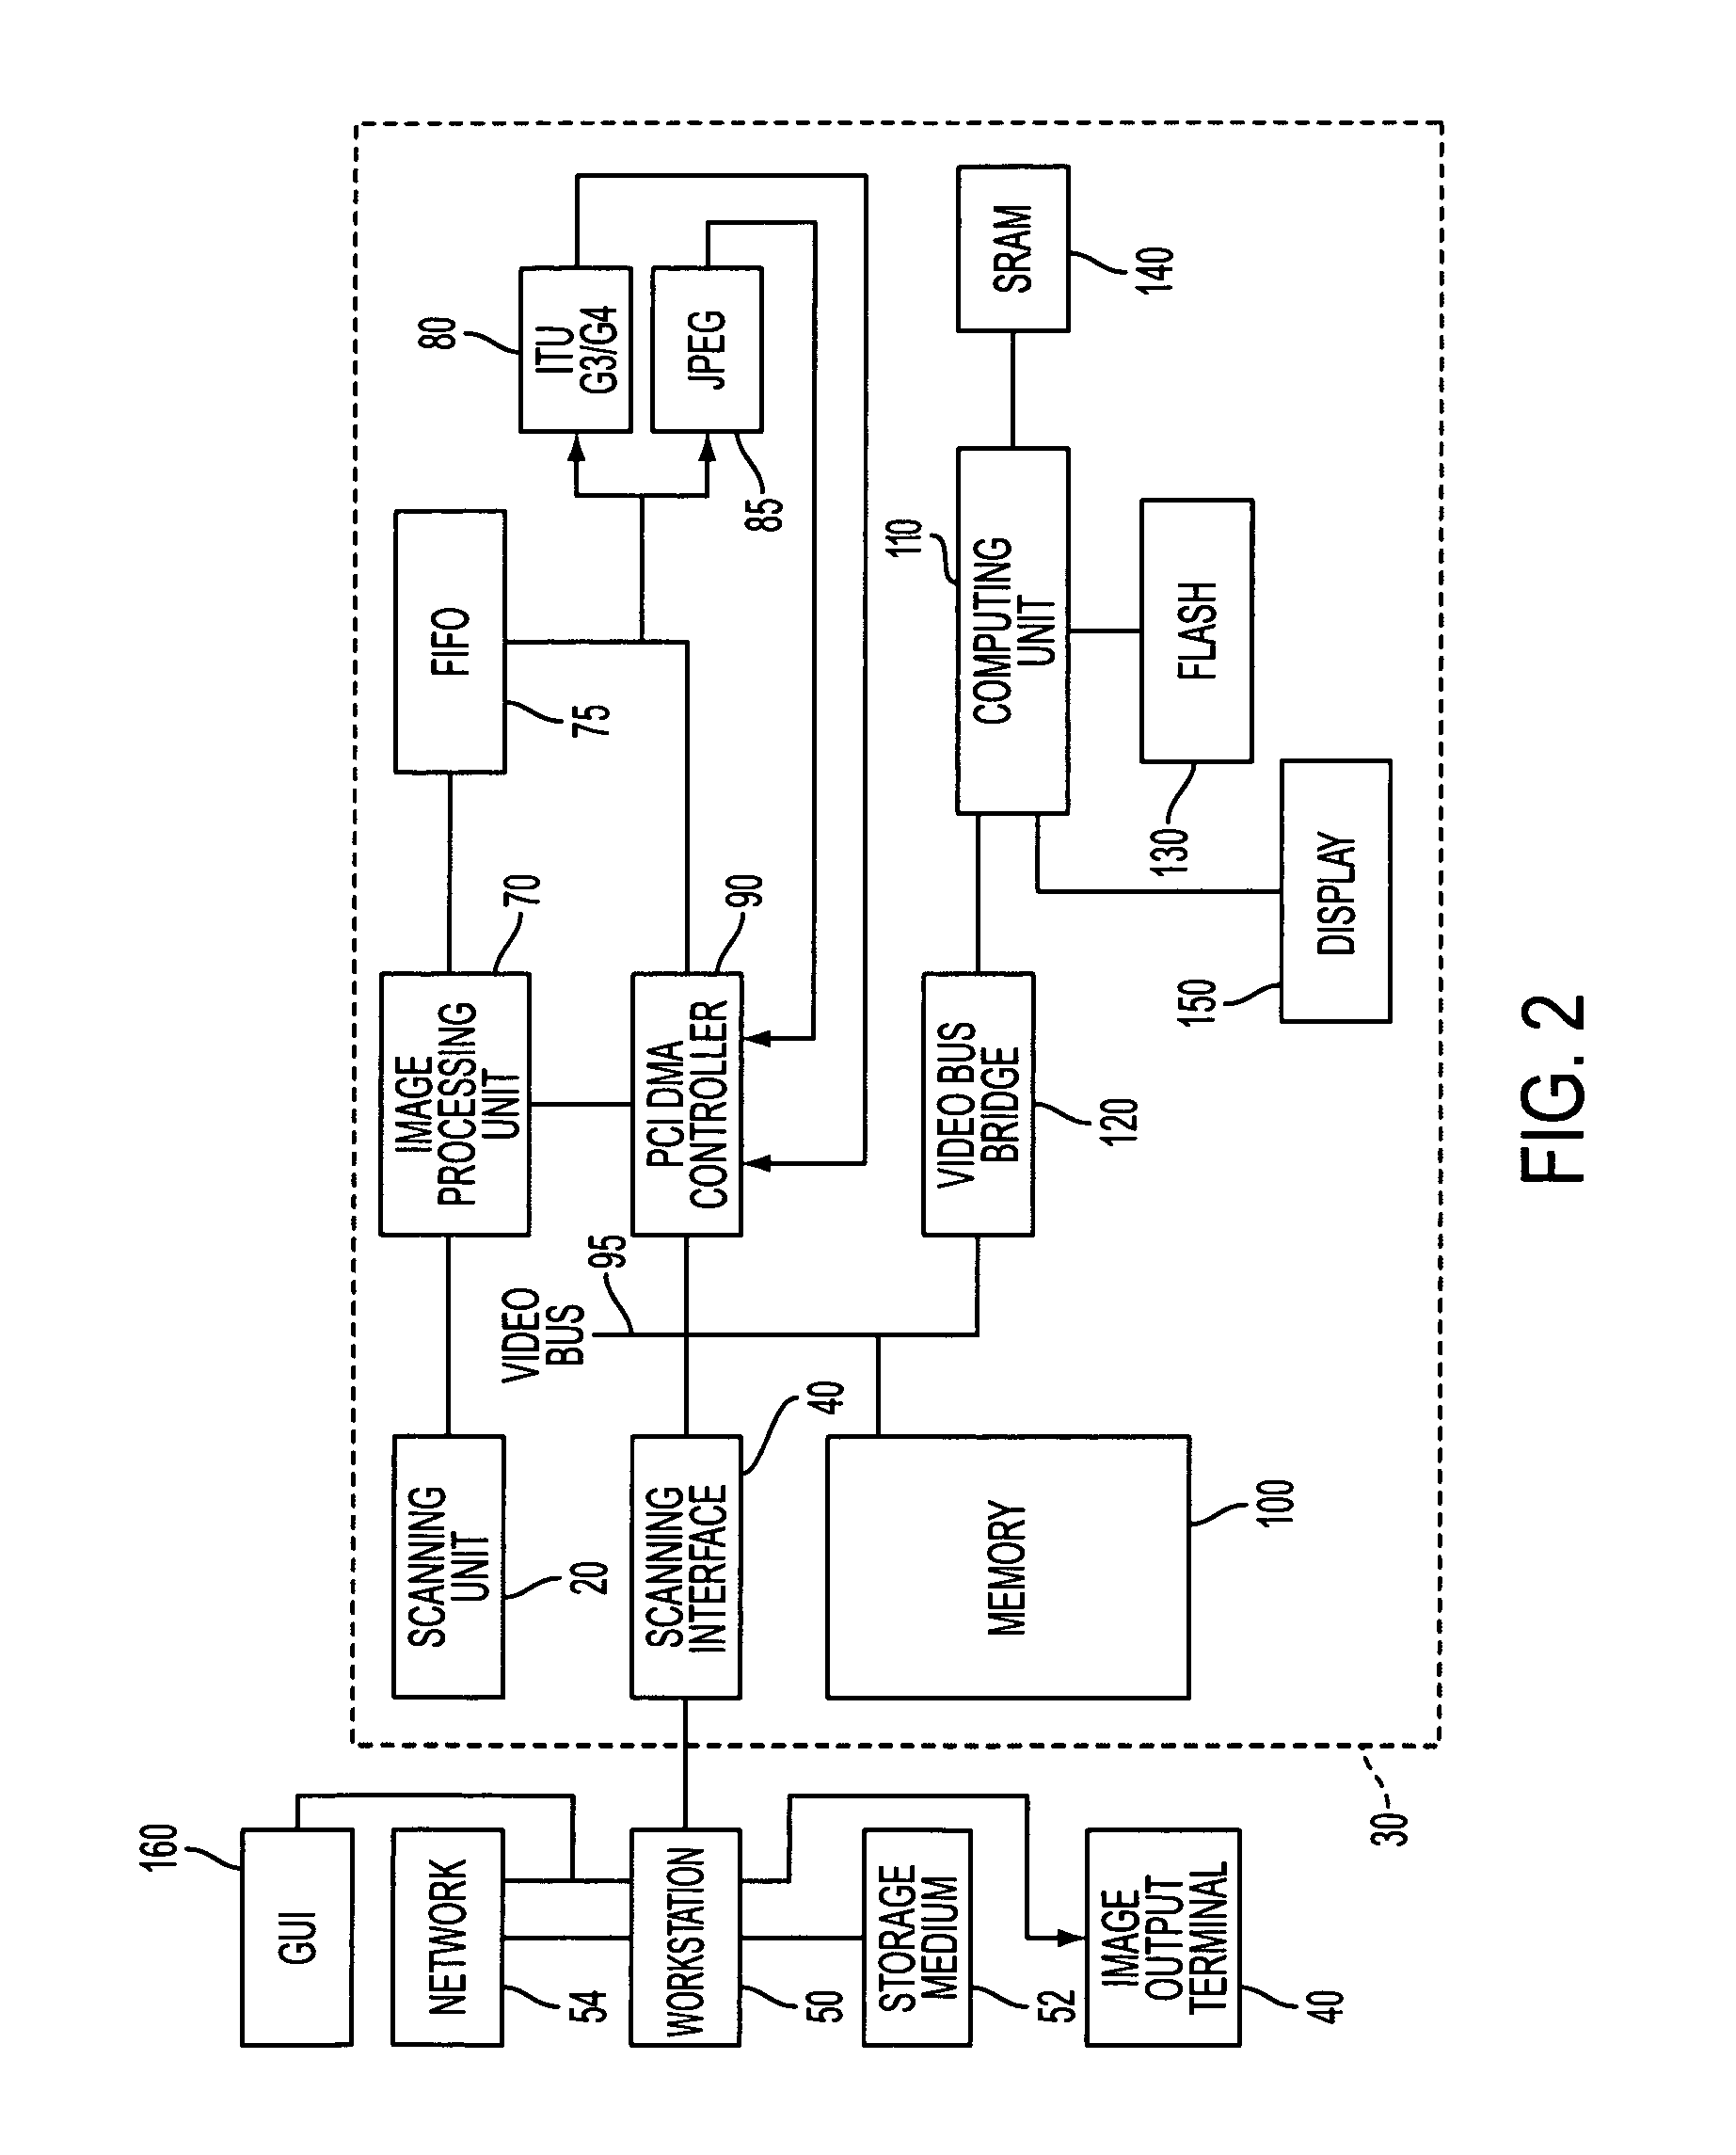 Systems and methods for optimal dynamic range adjustment of scanned images